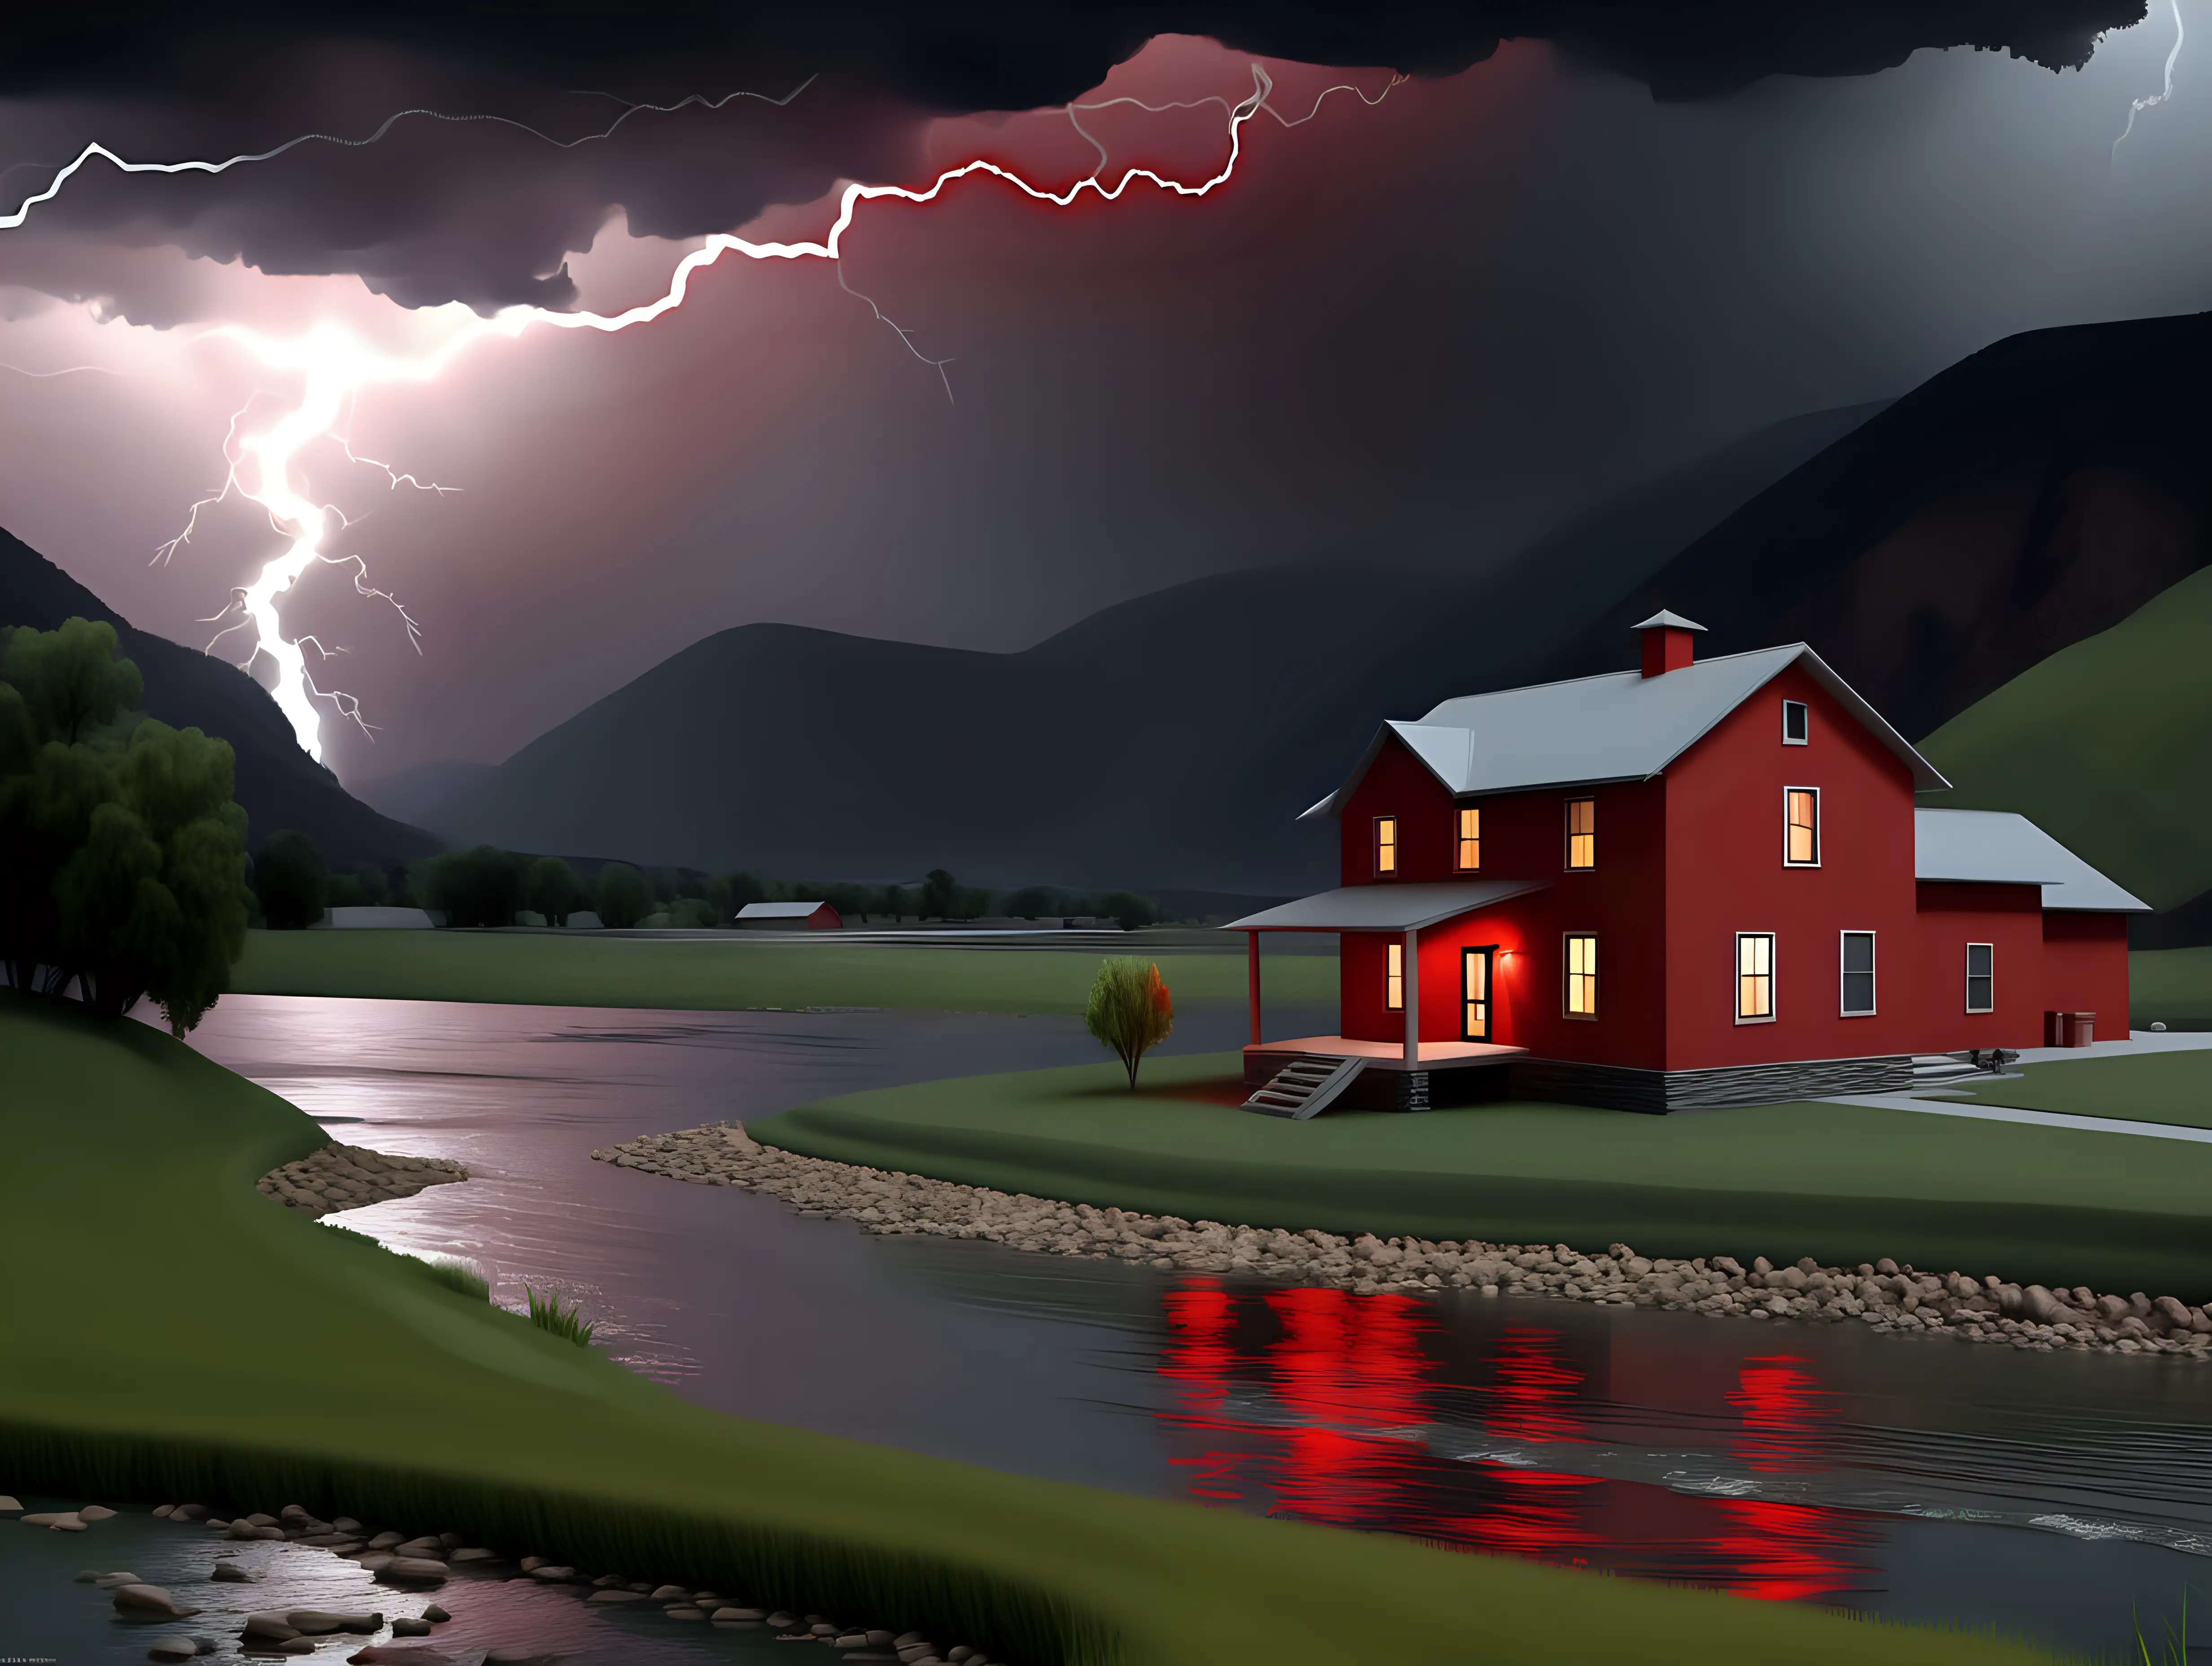 Picturesque Farmhouse Amidst Majestic Mountains with Dramatic Lightning